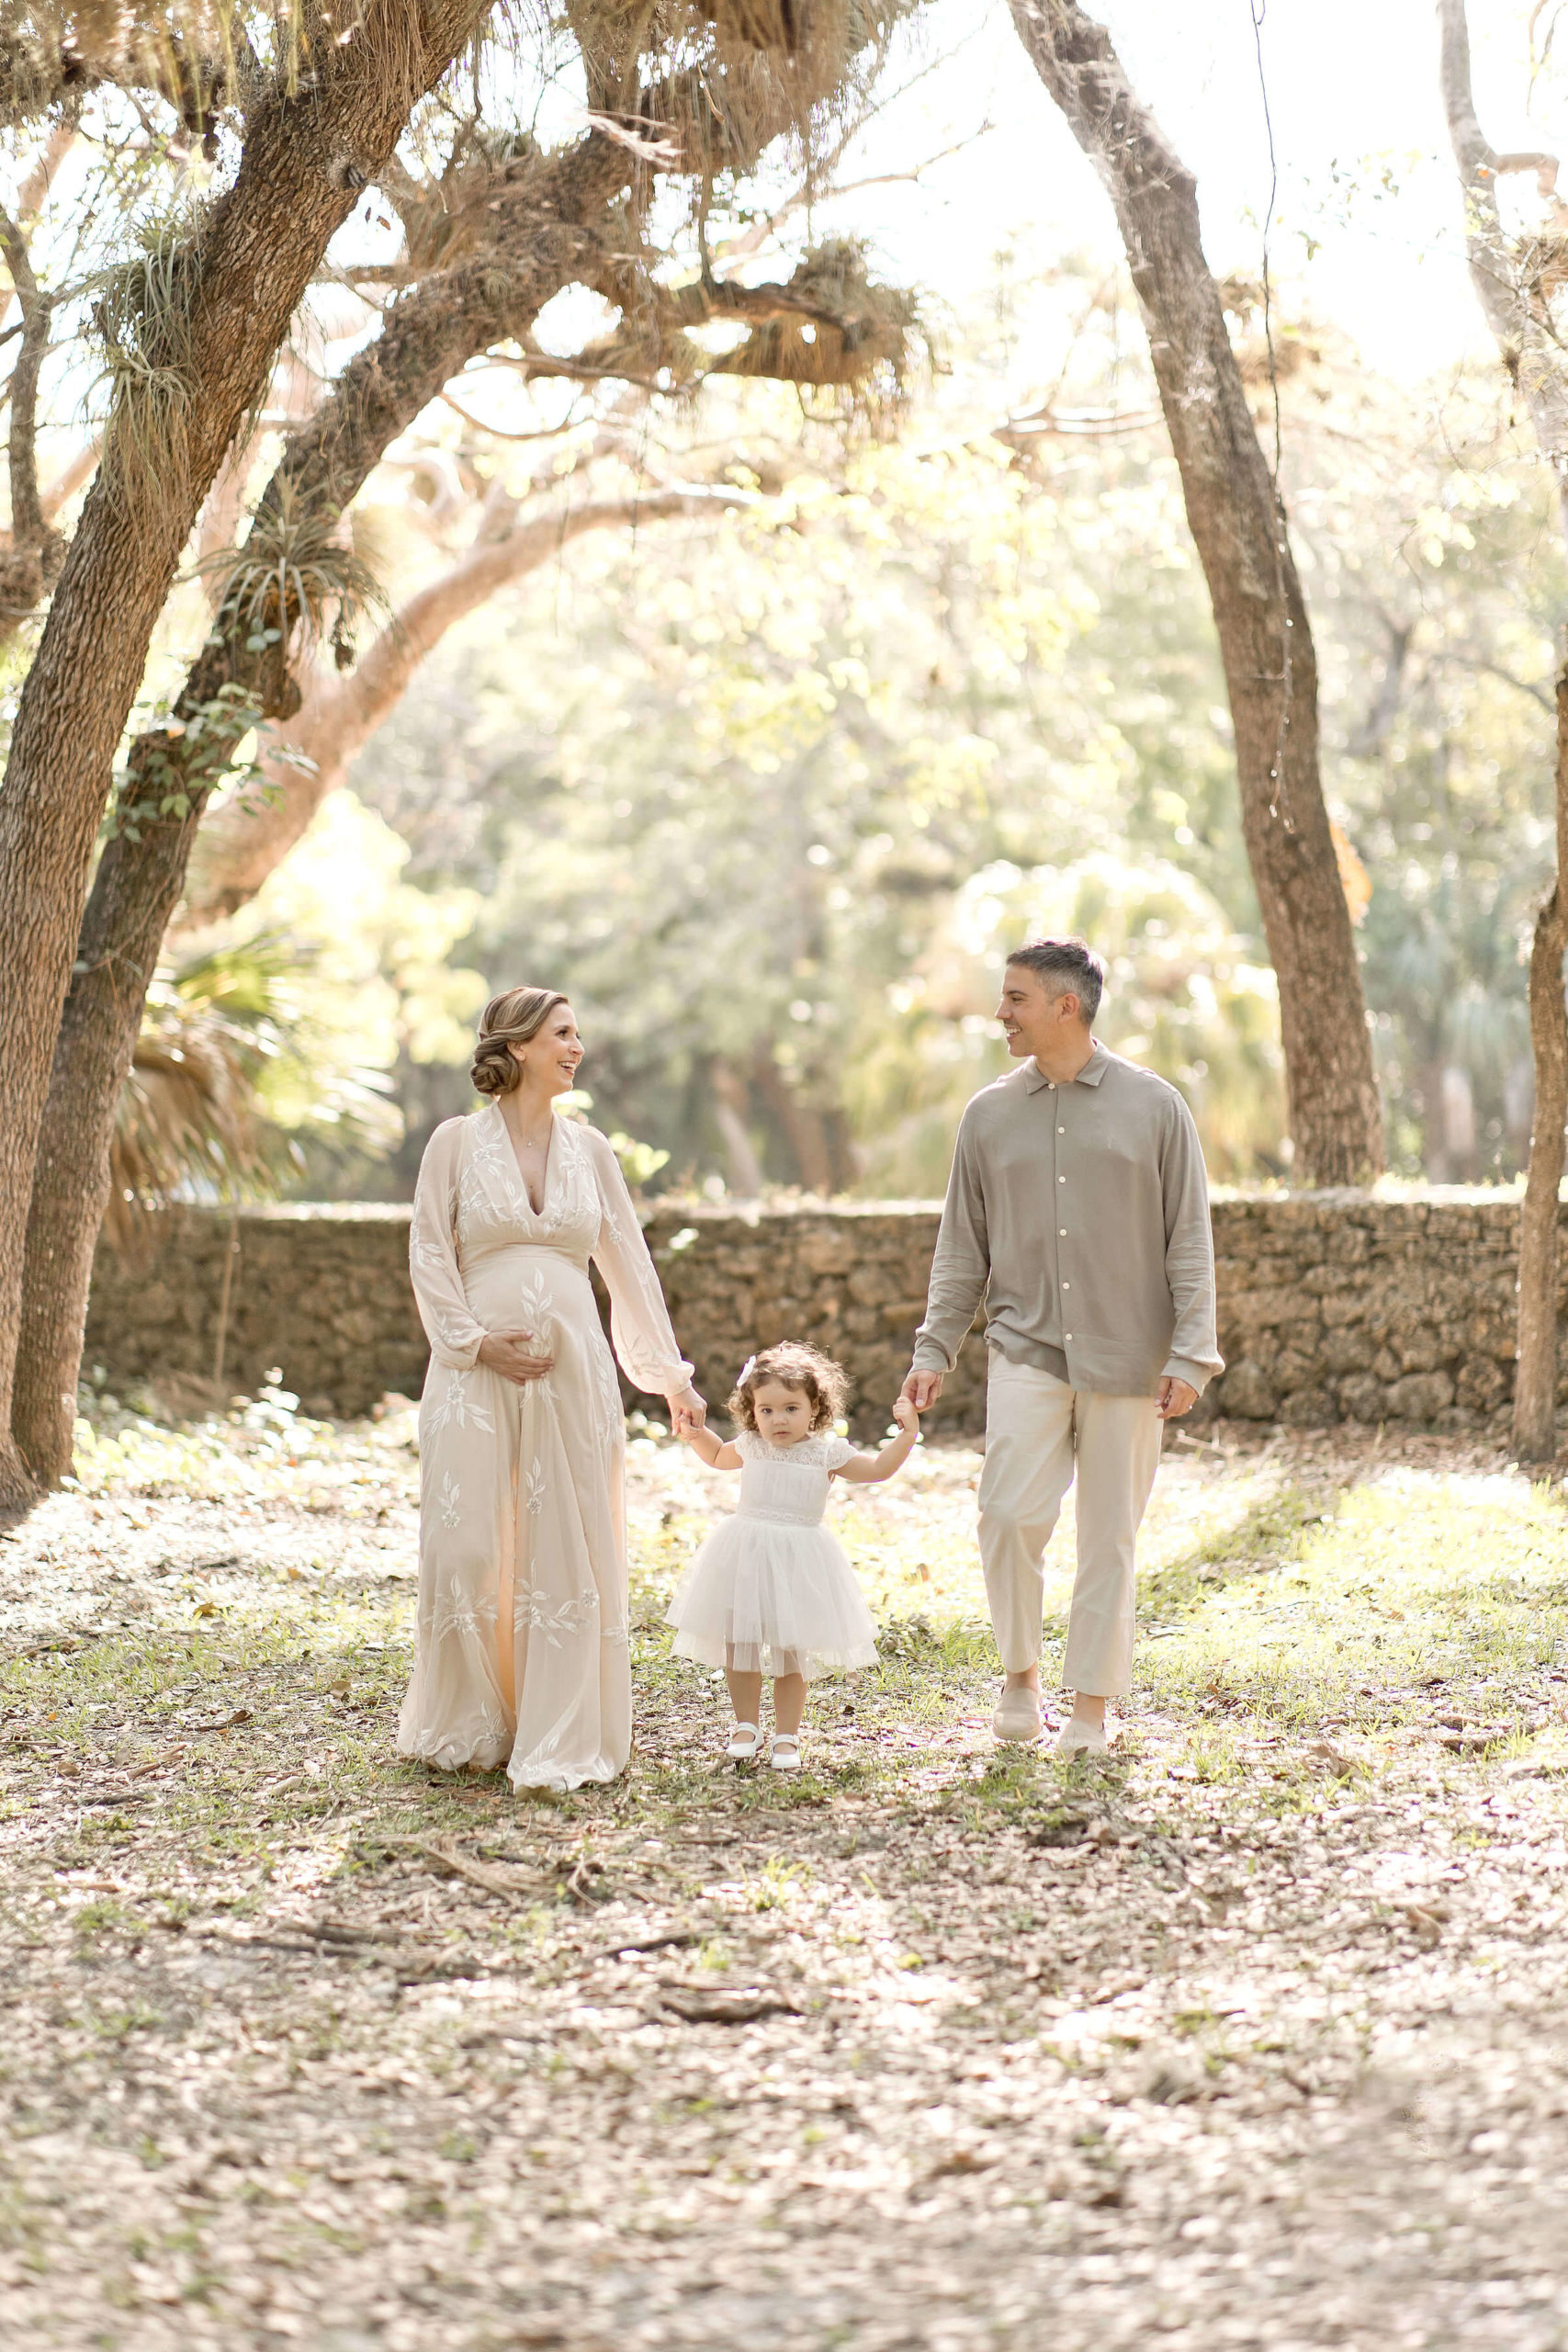 Baby boutiques in Miami offer a beautiful selection of outfits for kids that are perfect for family photoshoots.